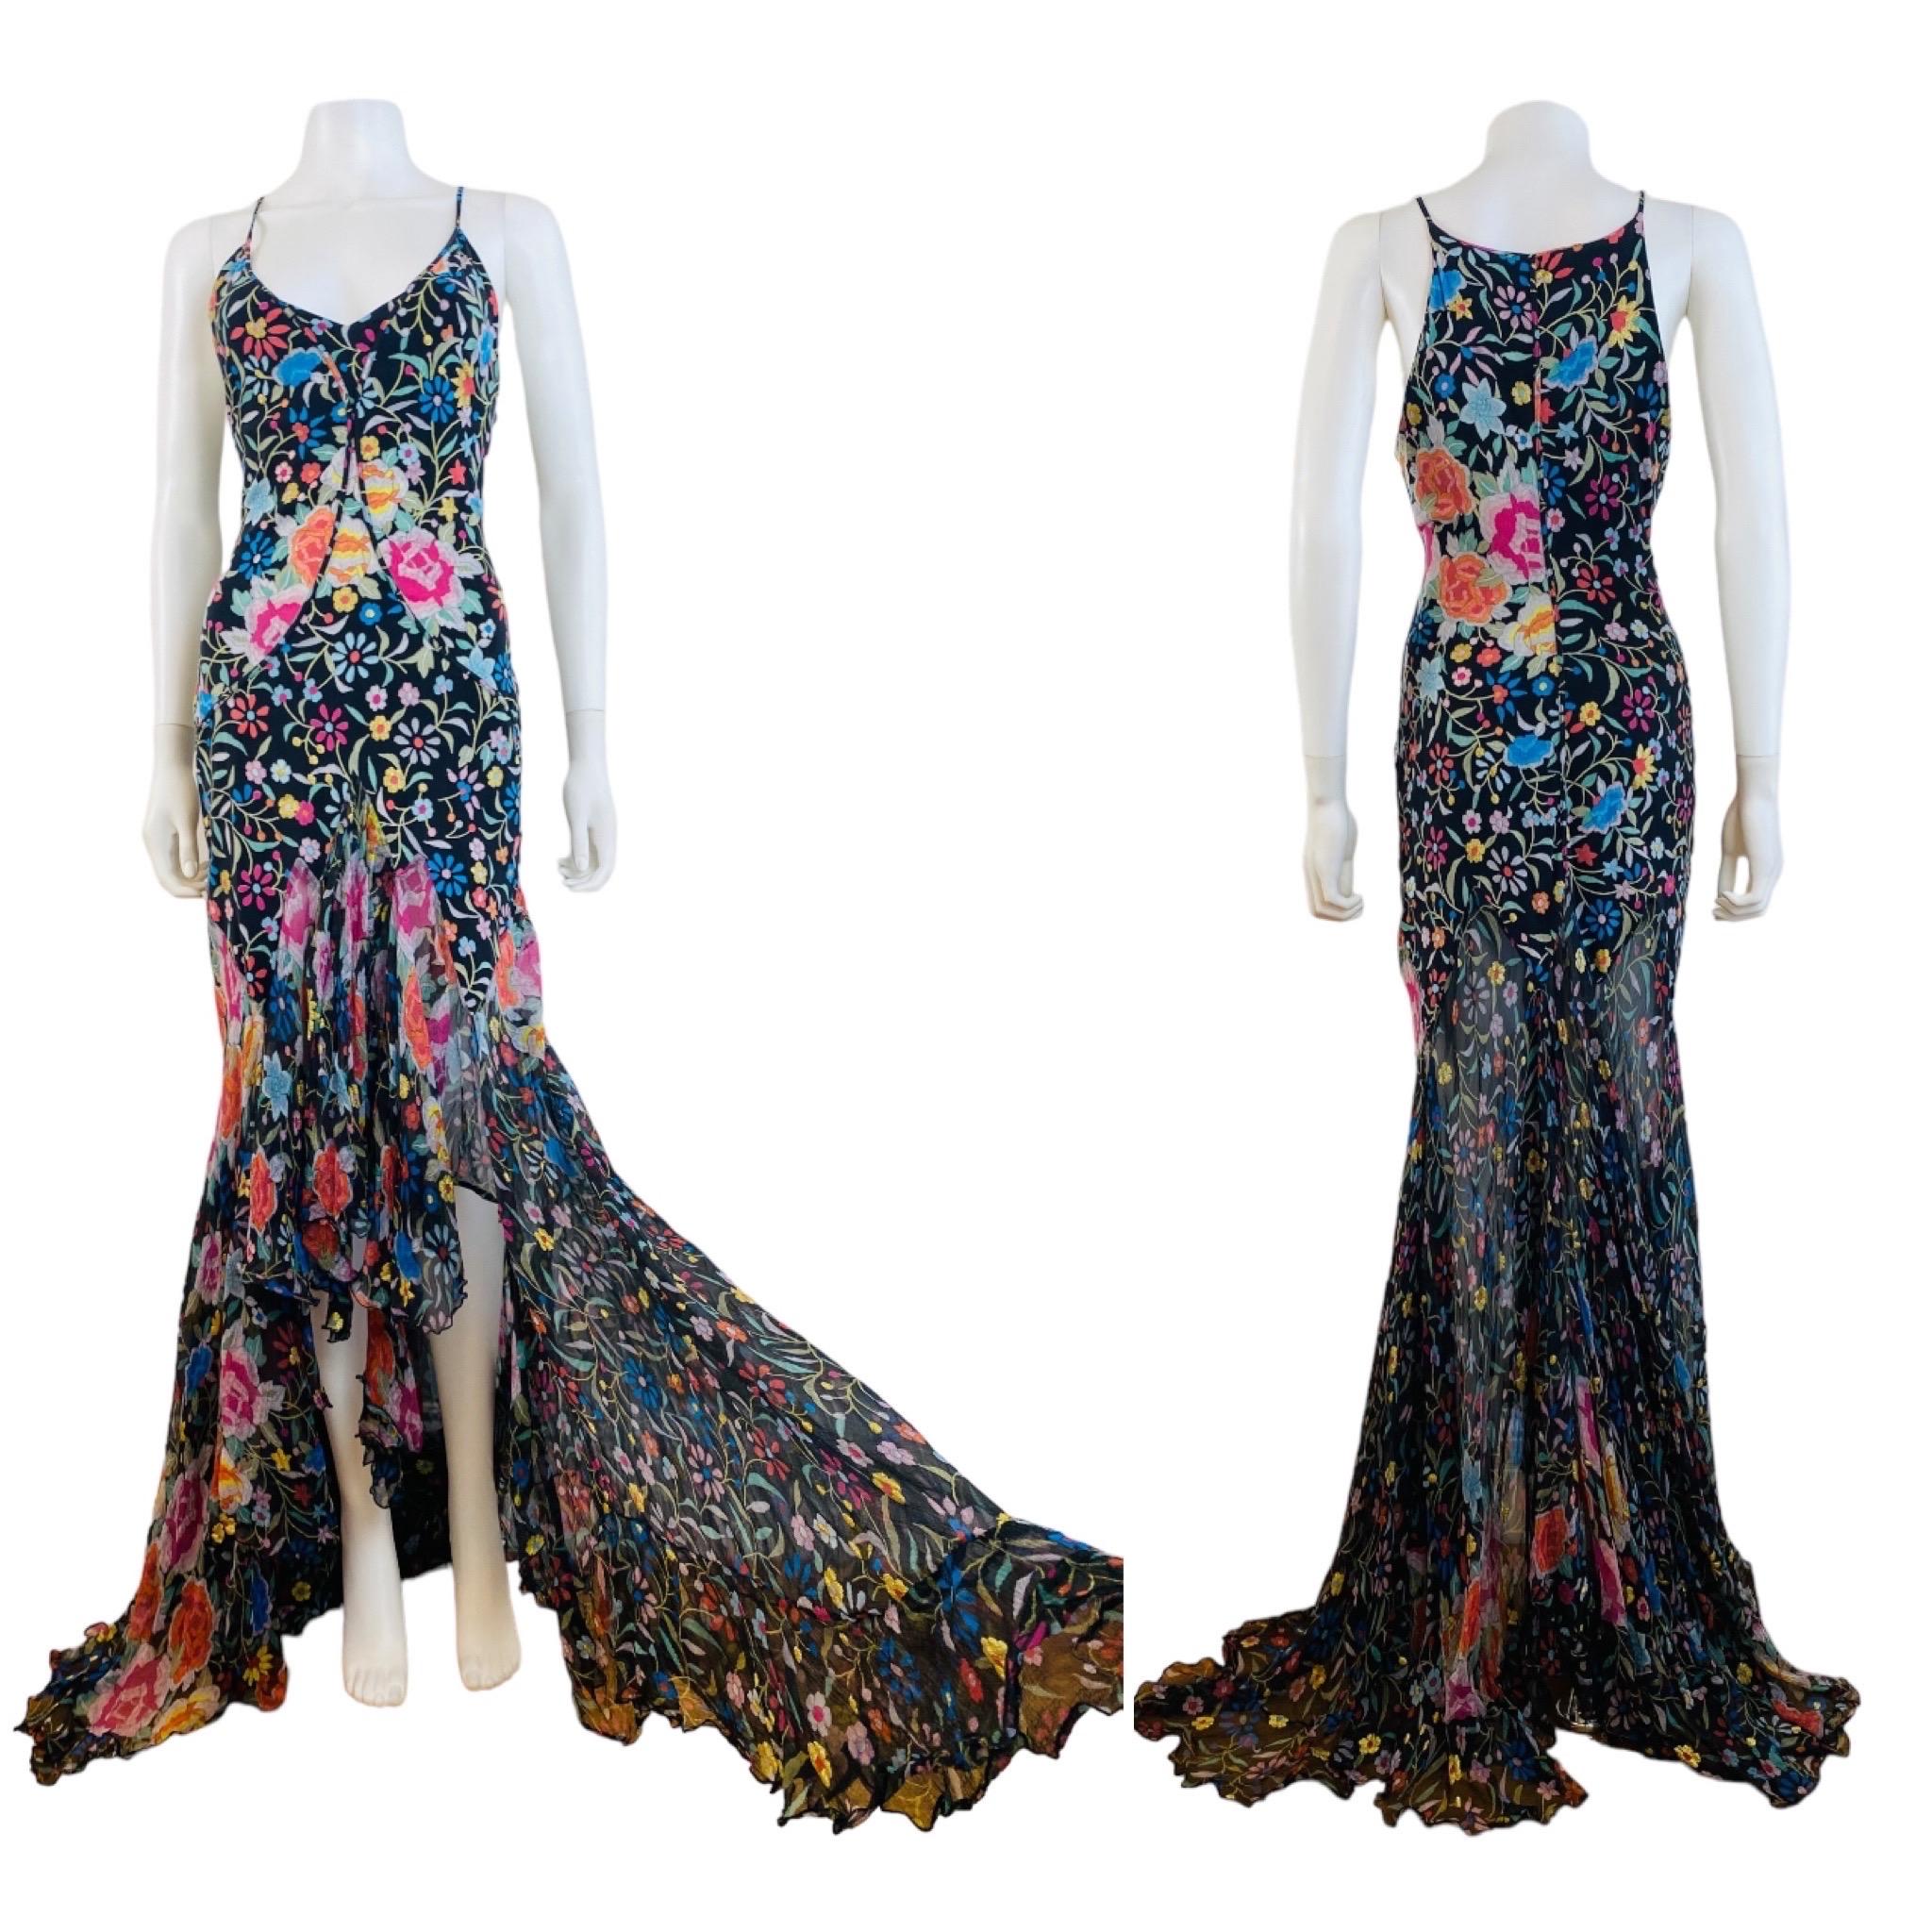 Incredible F/W 2004 Roberto Cavalli Dress (shown pinned to mannequin)
Black stretch silk fabric (silk + lycra) with embroidered look floral pattern throughout with gold glitter accent flowers
Form fitted dress through the hips with ultra flared